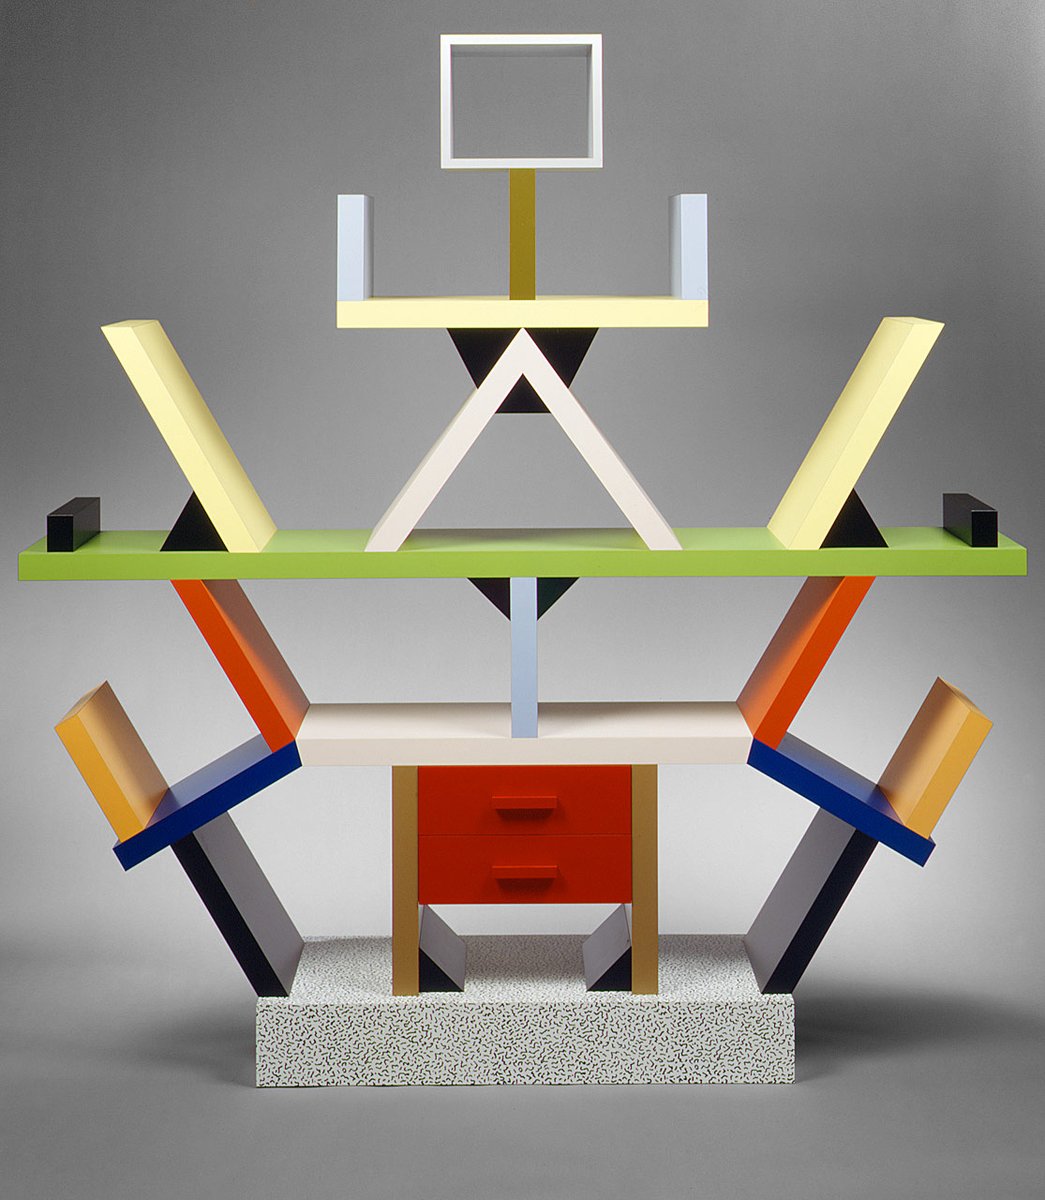 Kicking the year off with furniture and household objects by Italian designer and architect Ettore Sottsass, 1980s. After starting his career with Olivetti, he founded the influential Memphis Group in 1980, known for their colorful, playful, and abstract designs